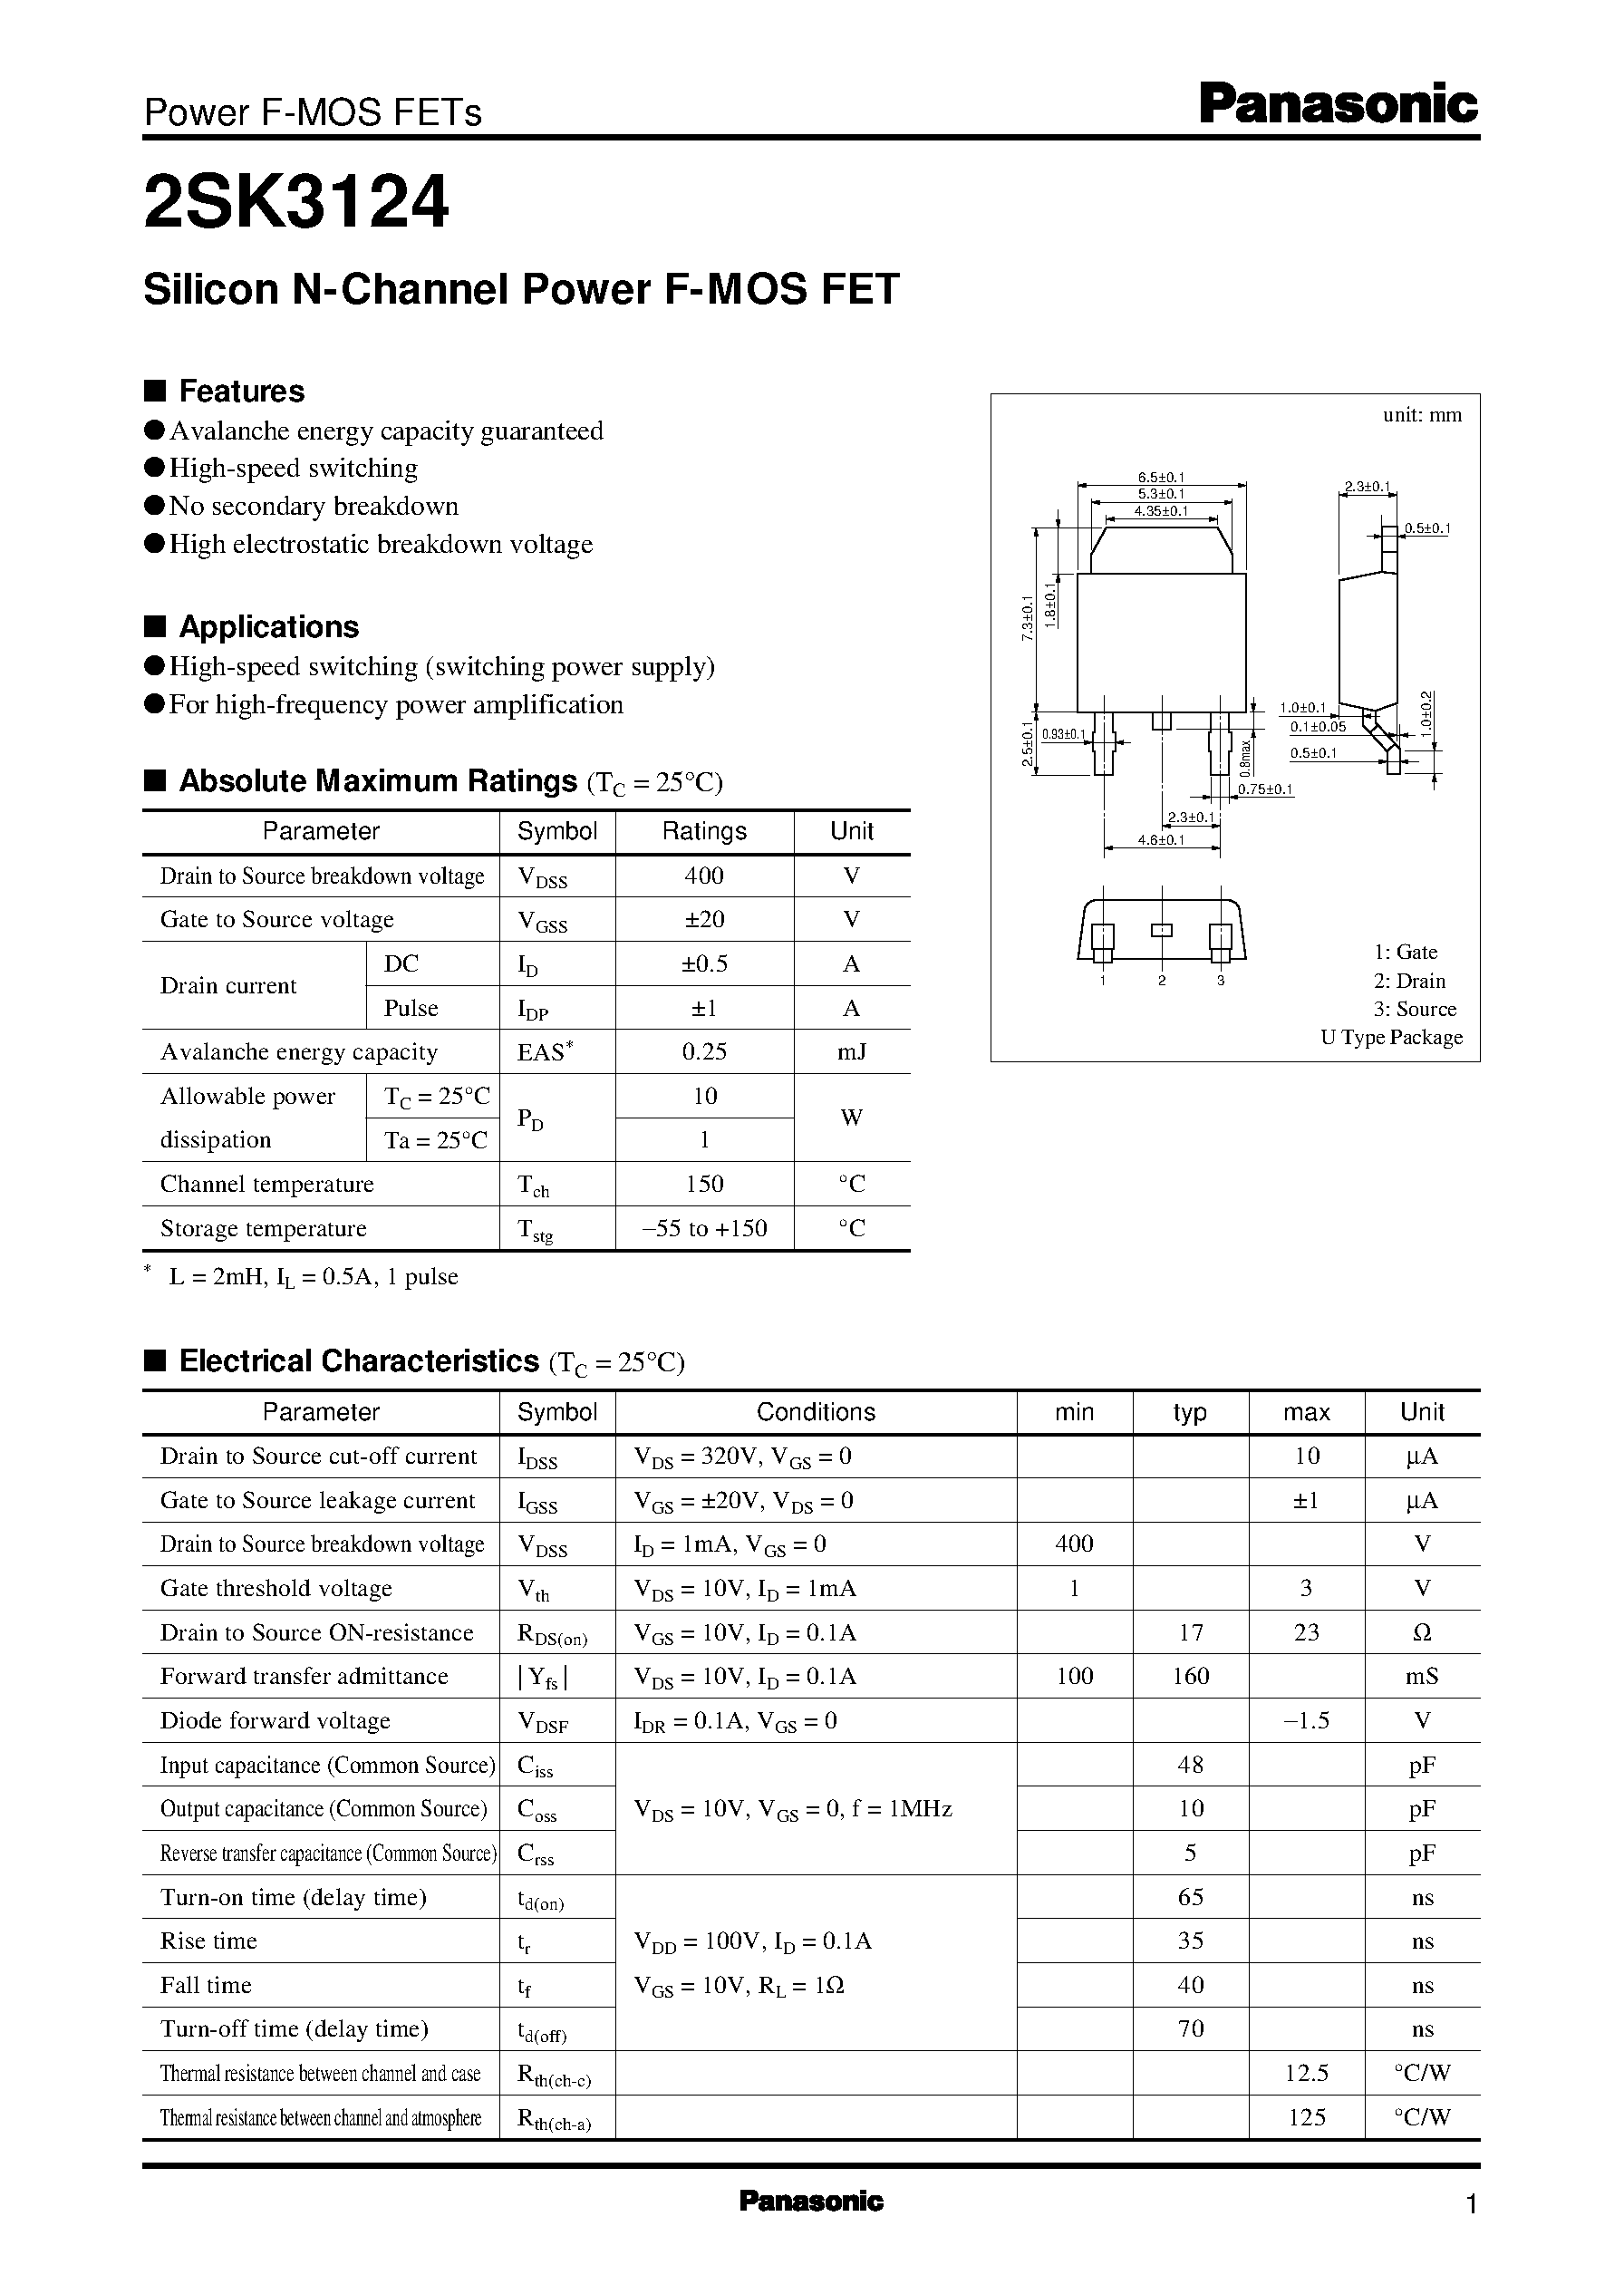 Datasheet 2SK3124 - Silicon N-Channel Power F-MOS FET page 1